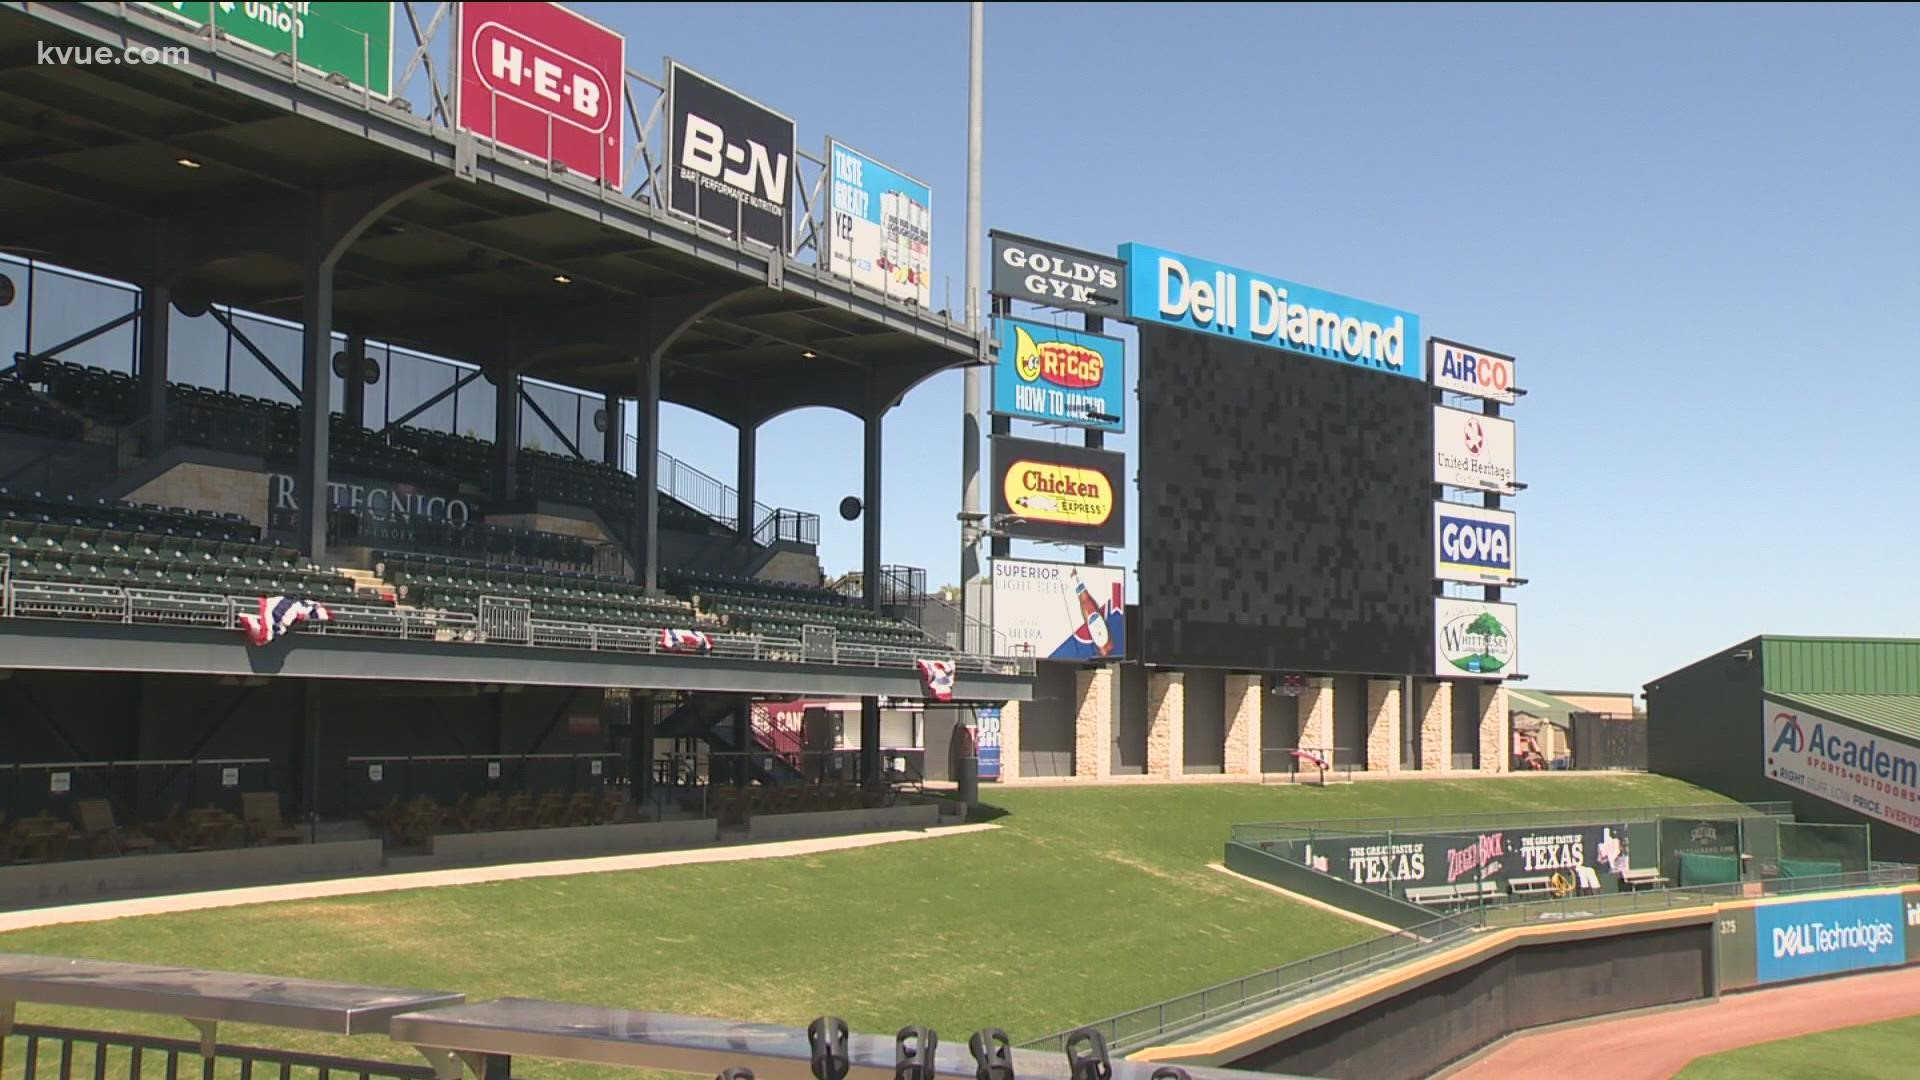 It's opening day for the Round Rock Express! KVUE's Rob Evans and Yvonne Nava have all the details on this season, including theme nights.